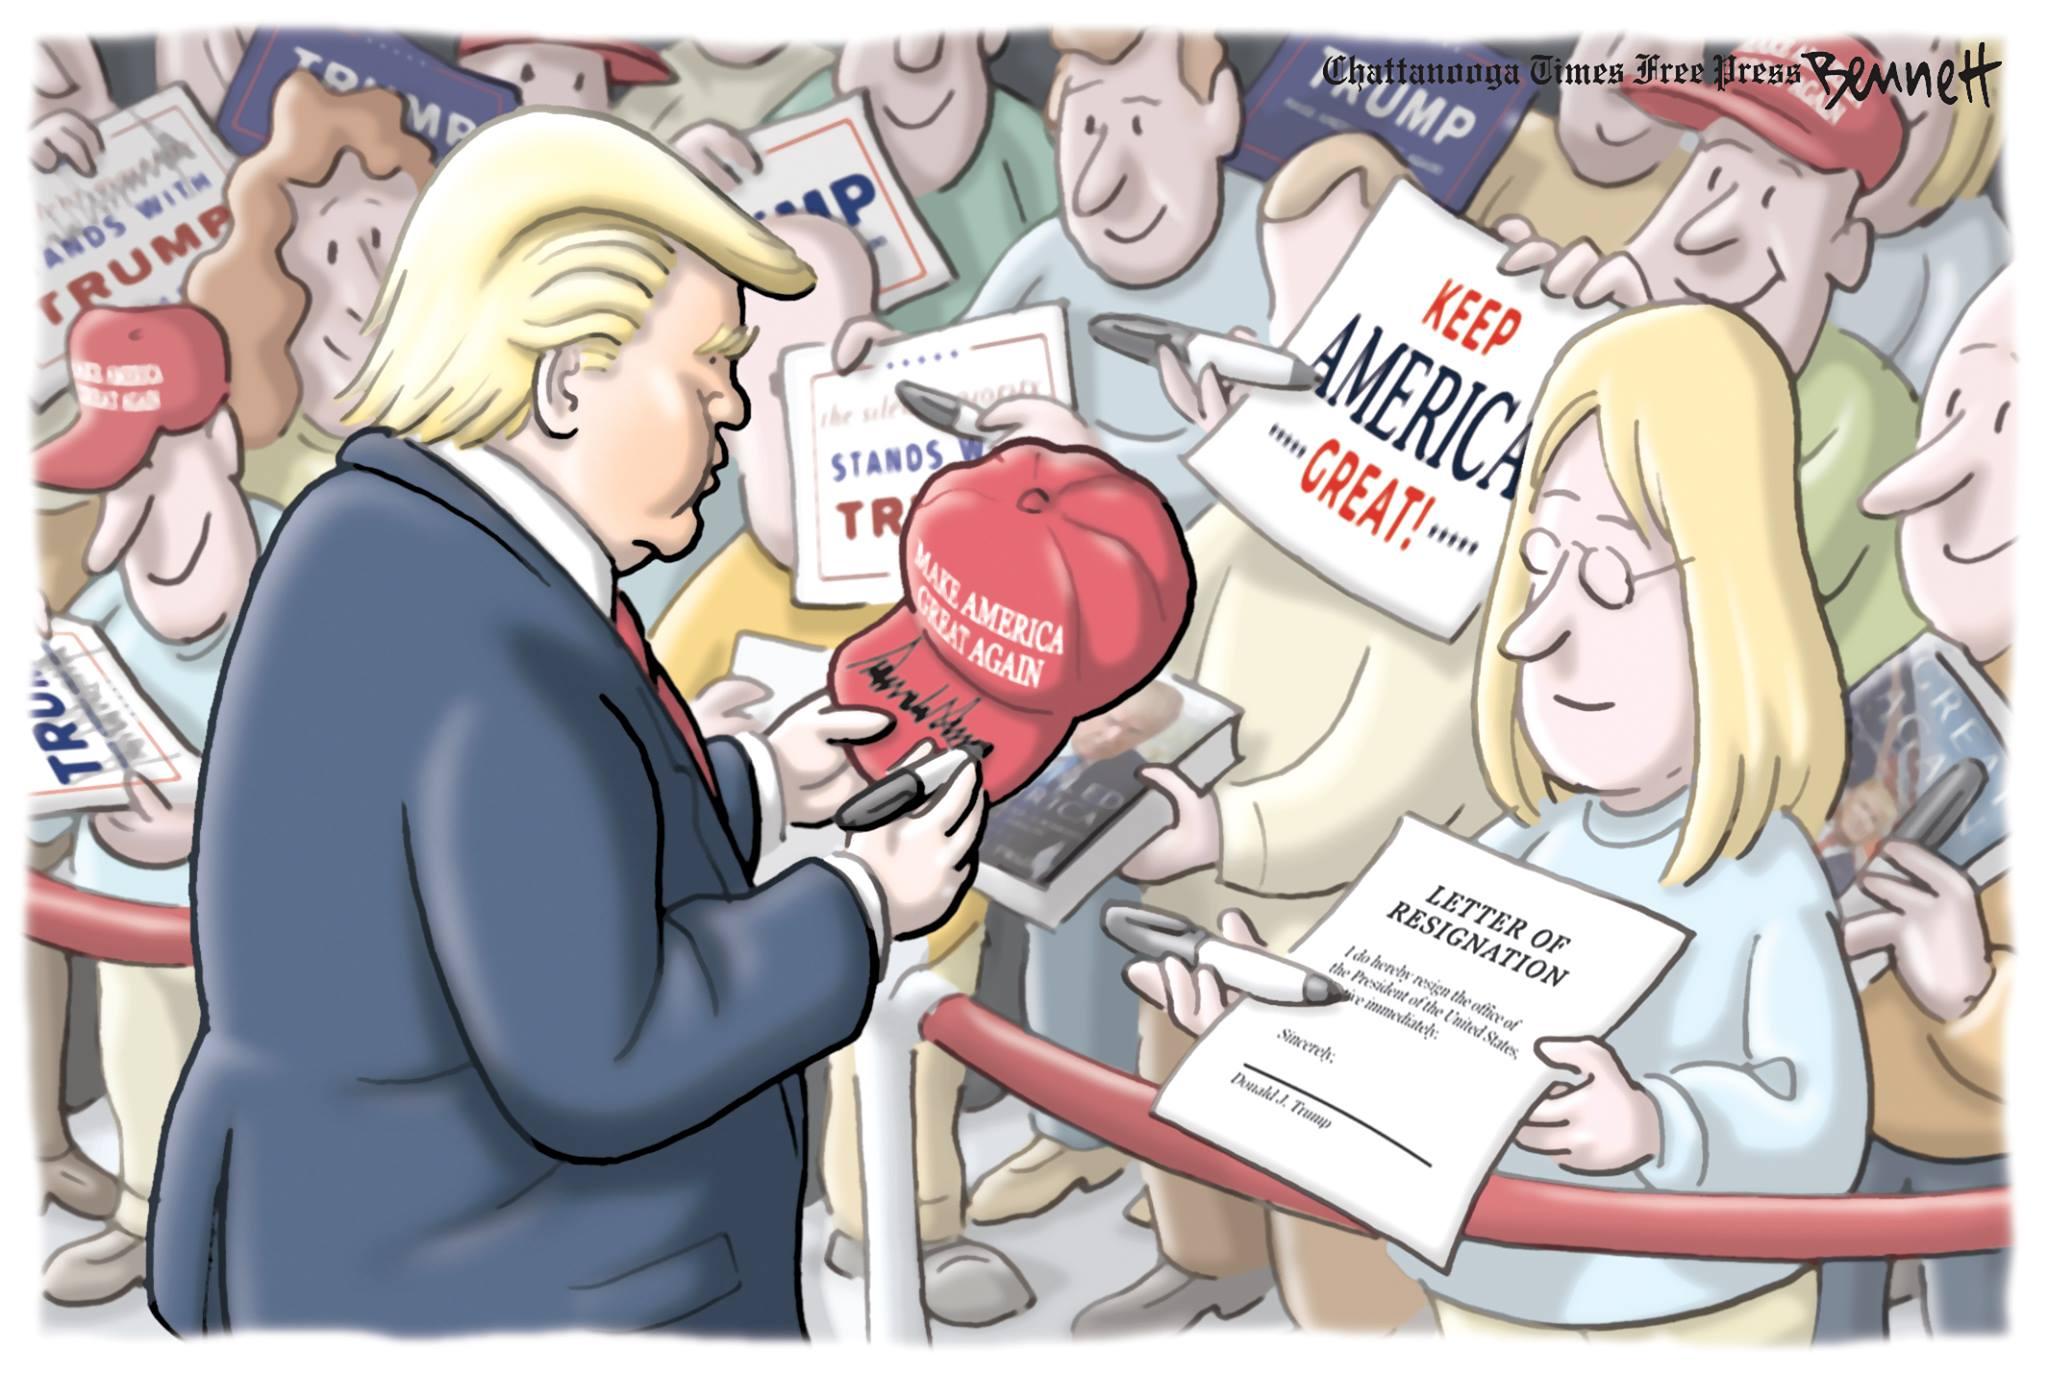 political meme cartoon - Chattanooga Times Free Press Bennett Crical O Great!... Stands S Uu America Agan Tru Letter Of Resignation I do henb nesign the ottic of the President of the United States emmileh Simench Duwall J. Trump